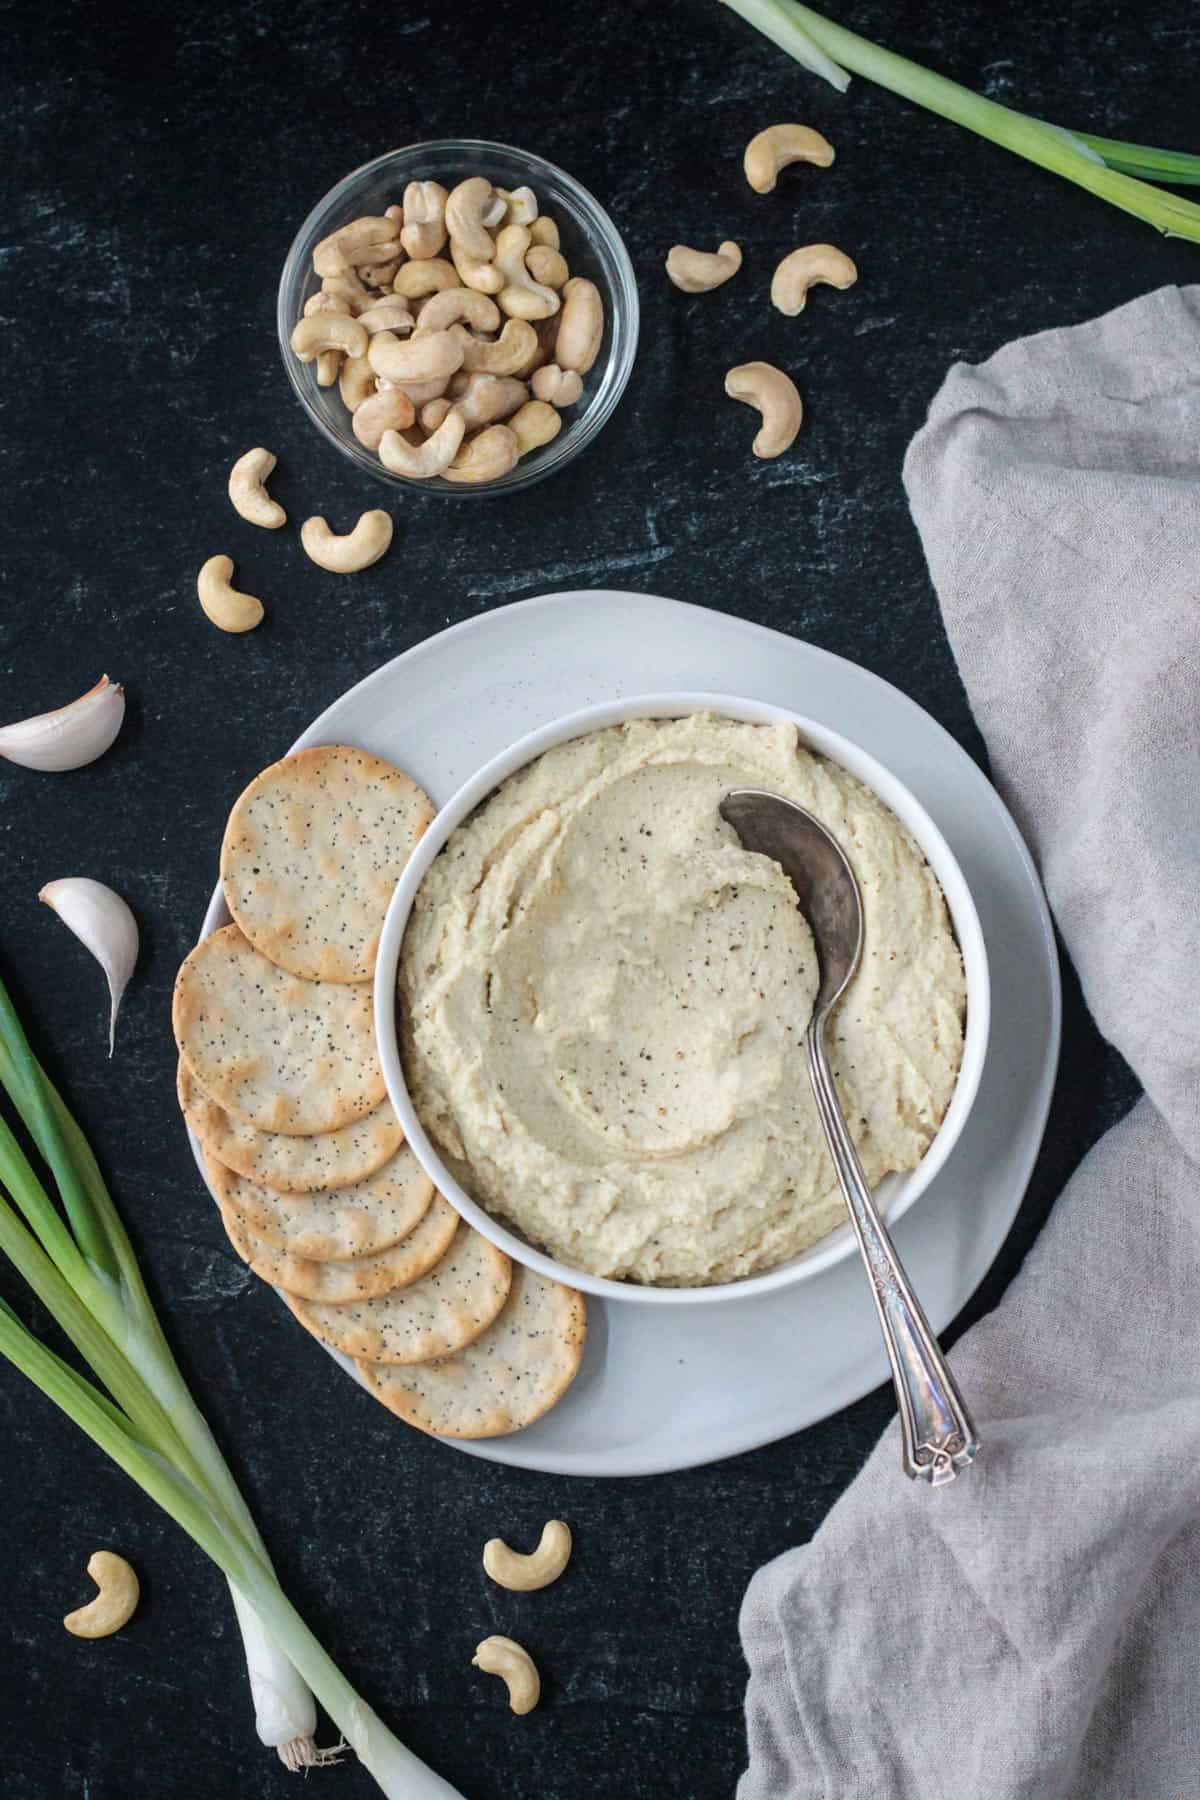 Vegan ricotta in a serving bowl on a plate with crackers.